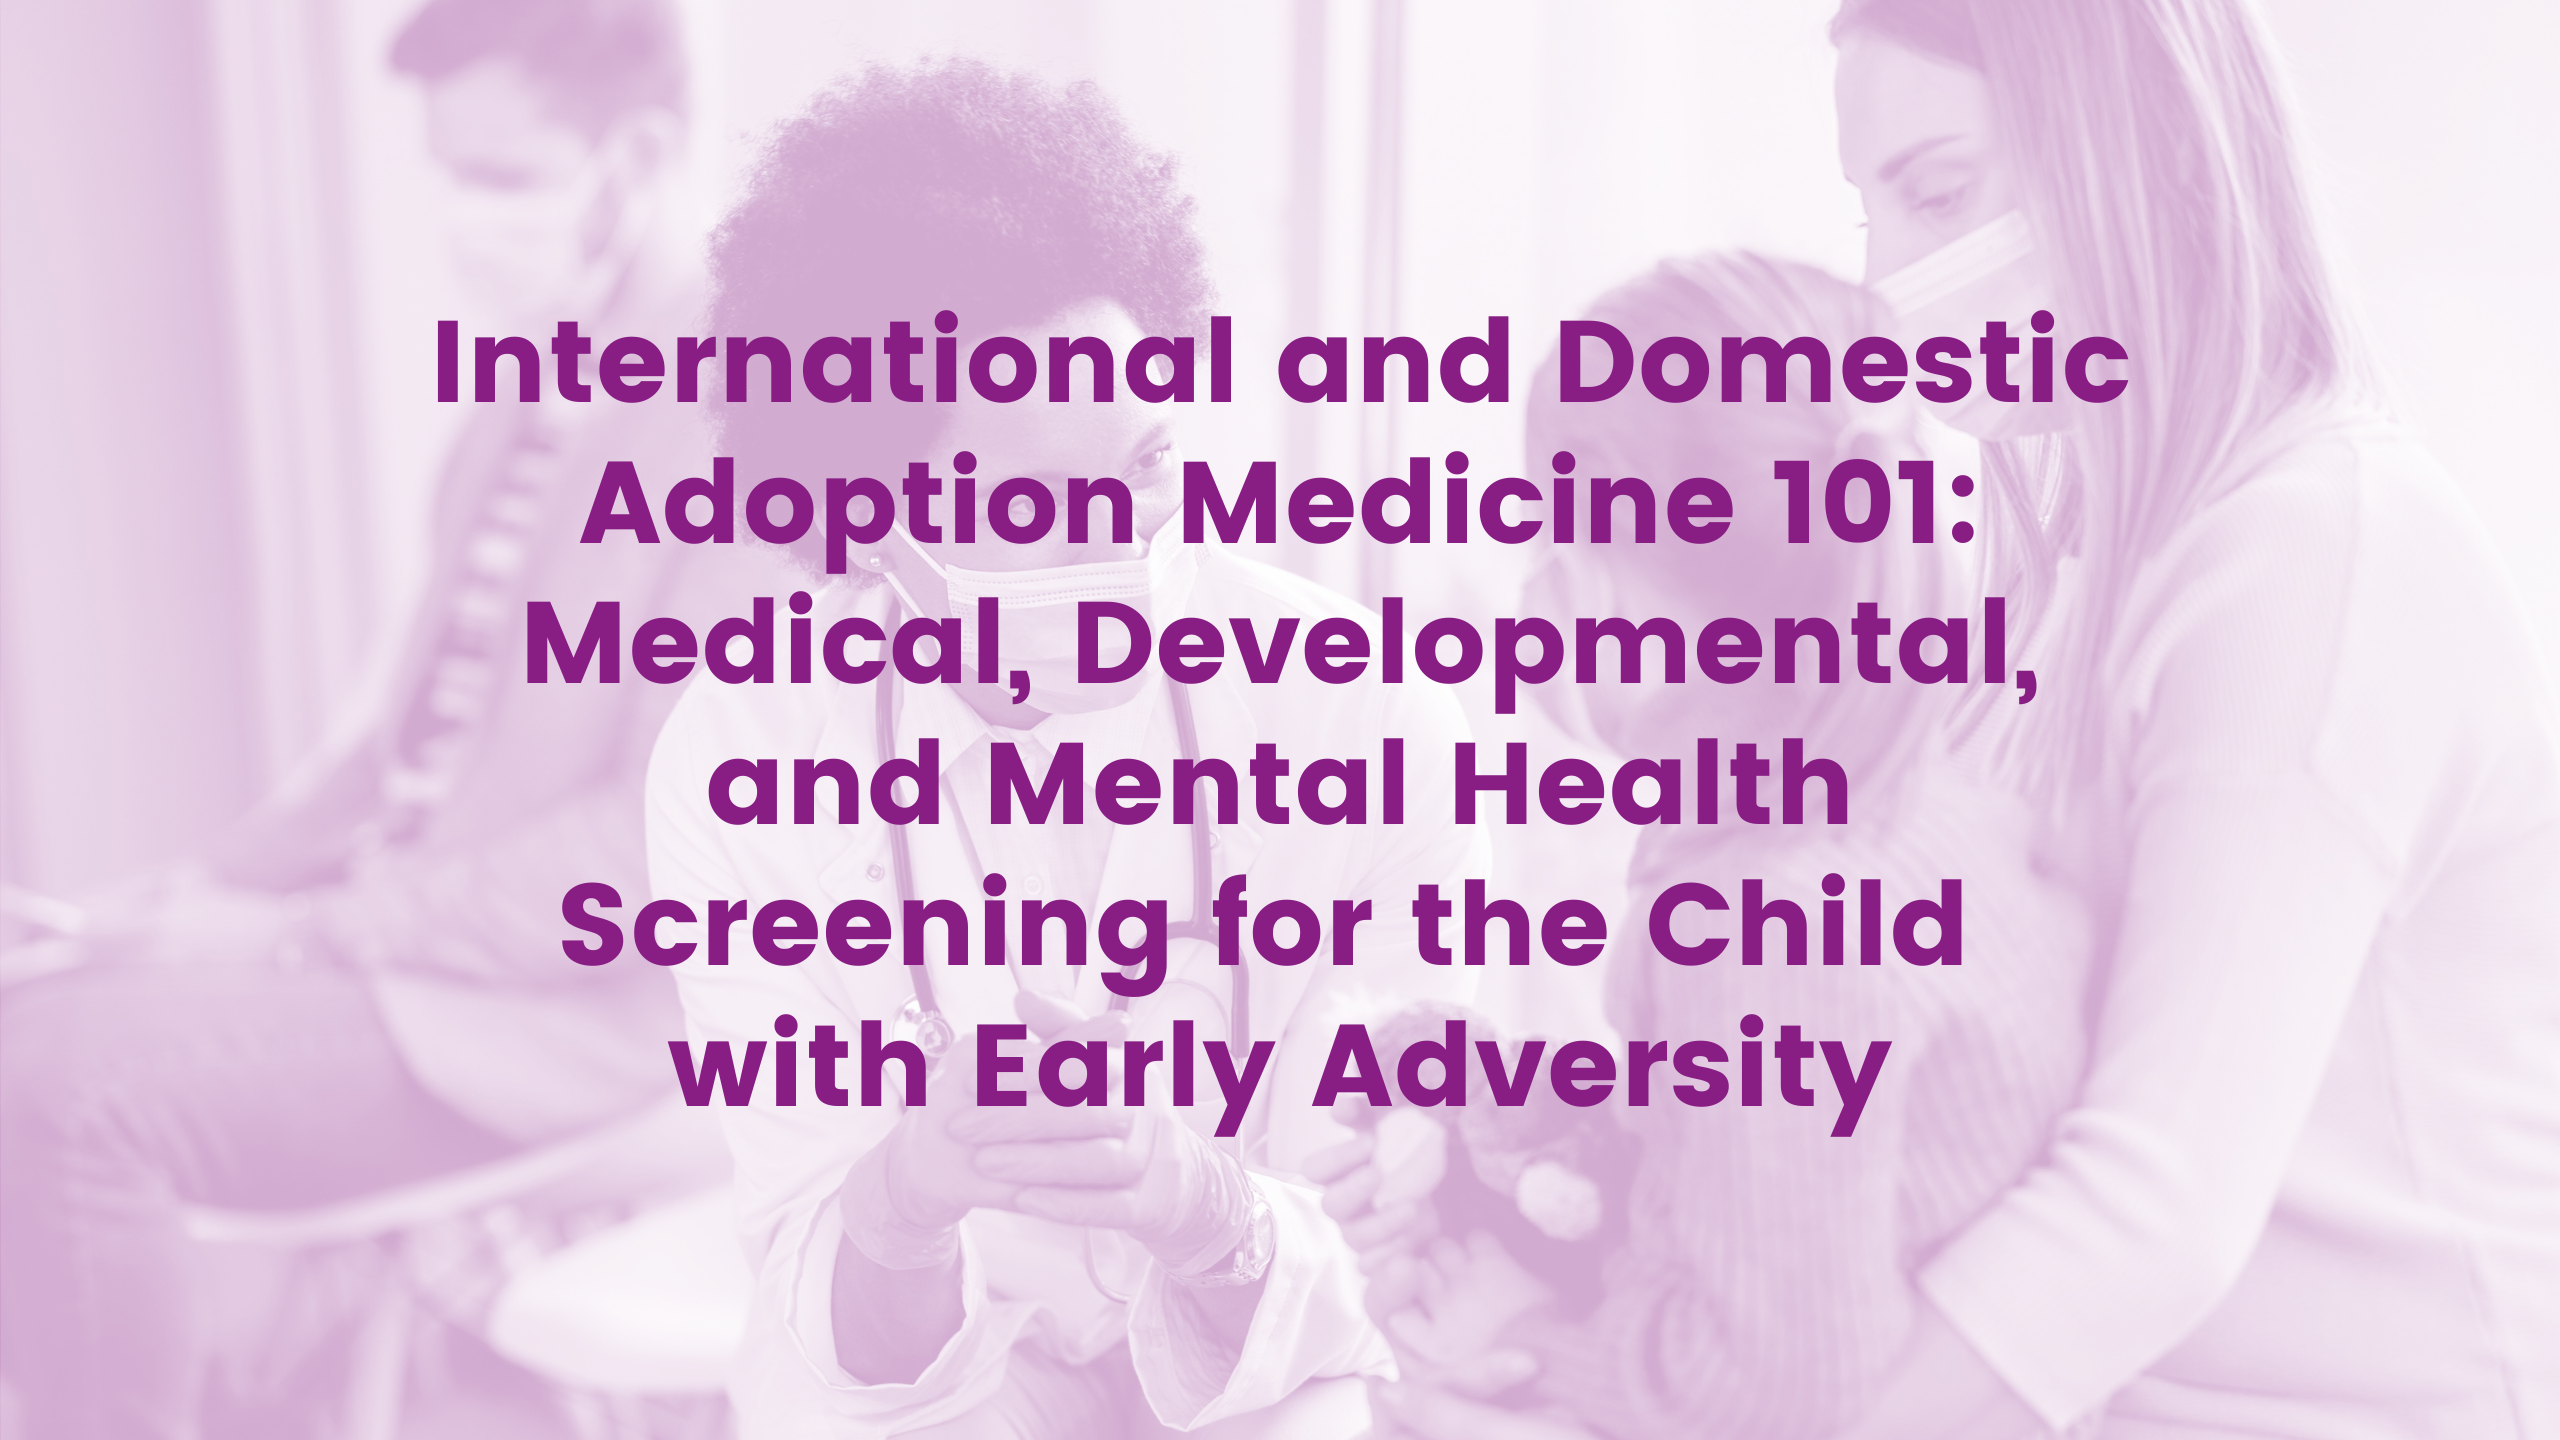 International and Domestic Adoption Medicine 101: Medical, Developmental and Mental Health Screening for the Child with Early Adversity Webinar